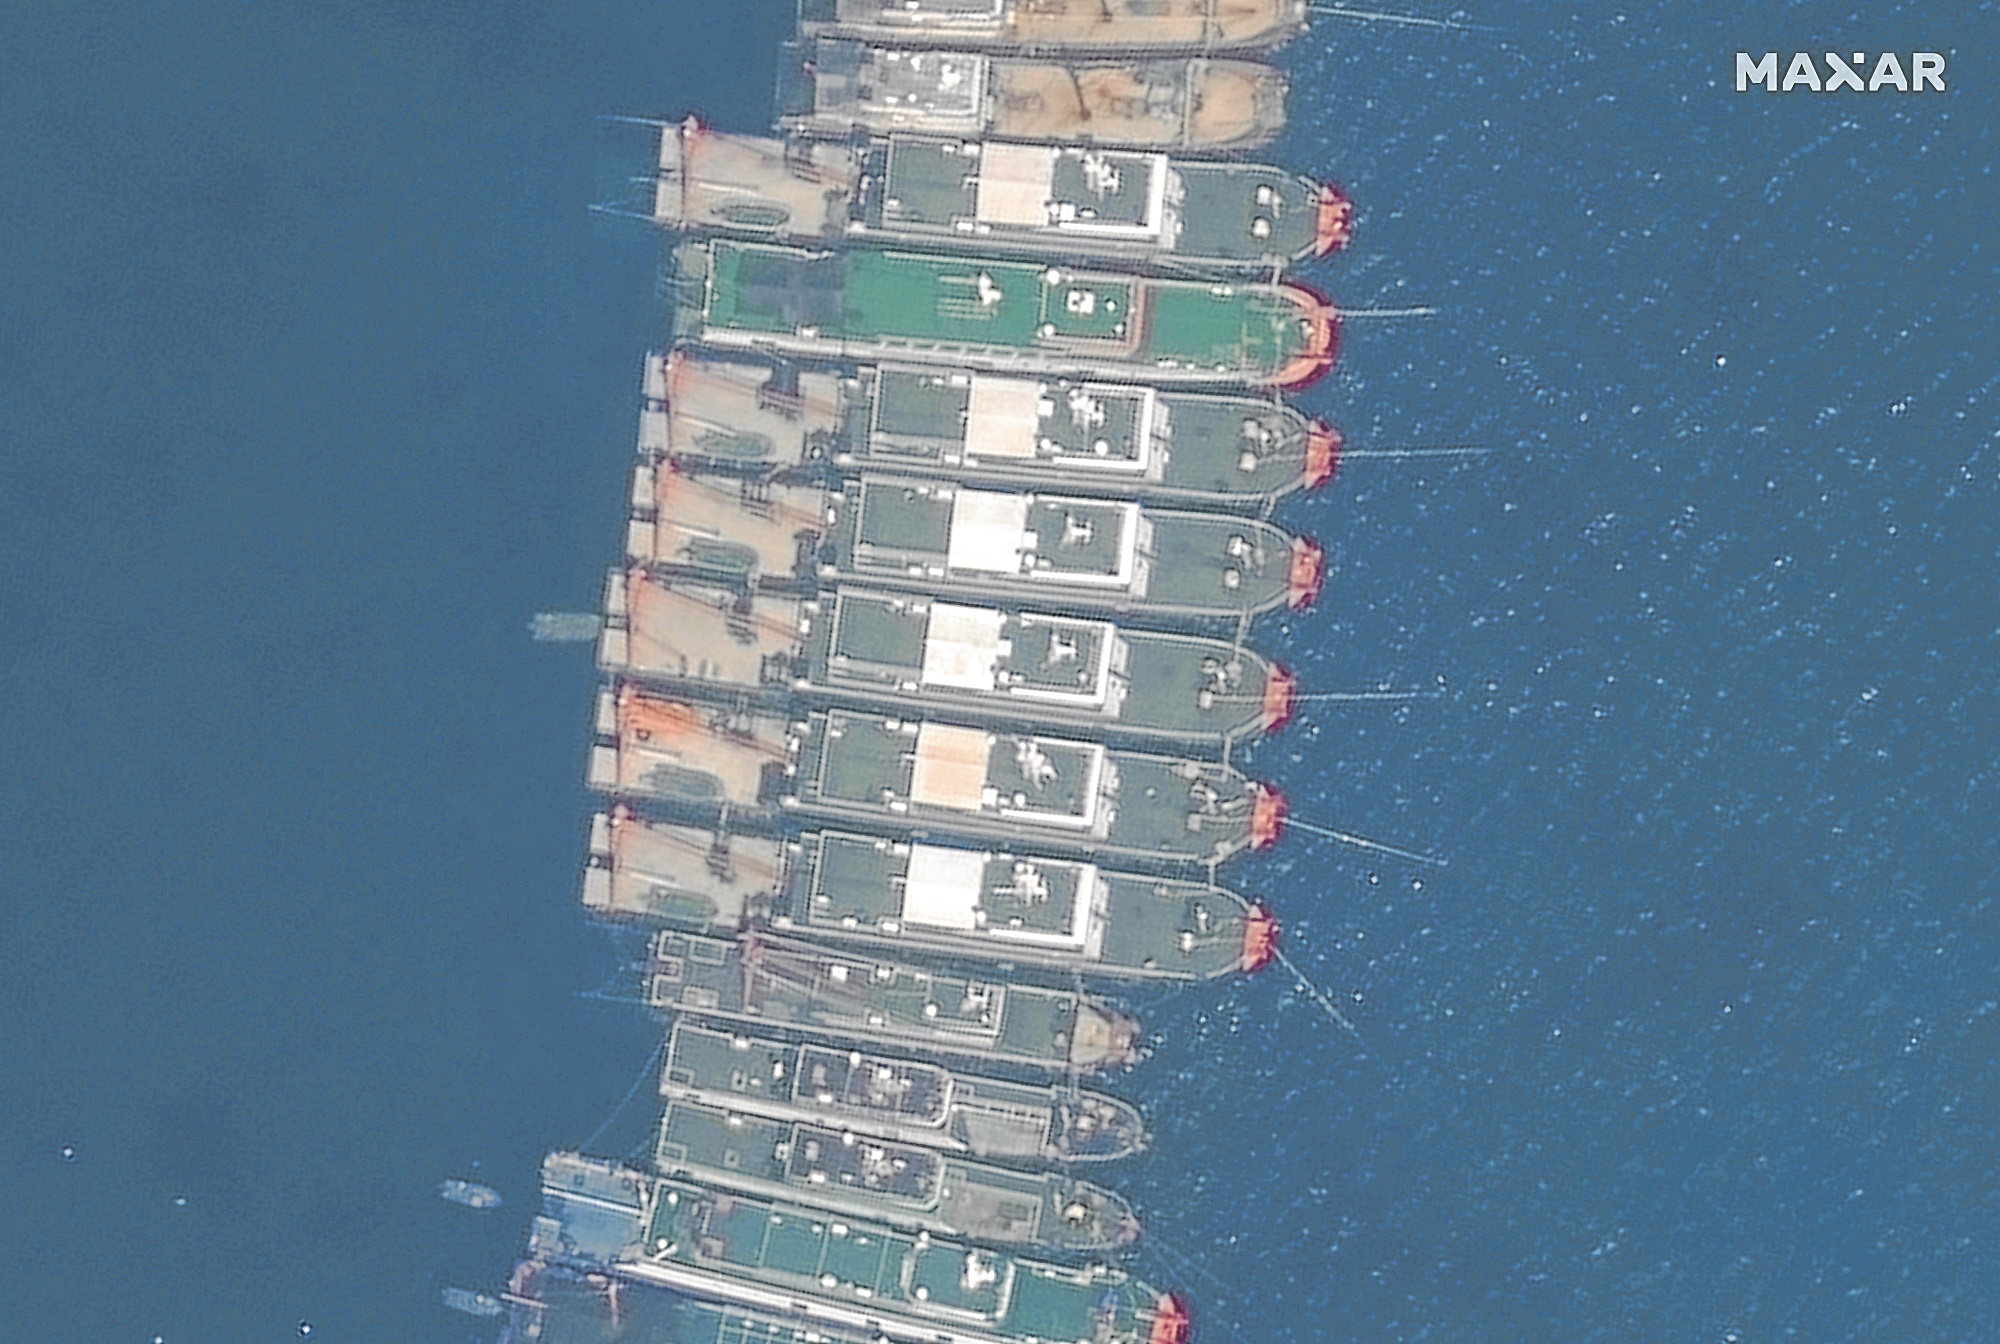 Close up view of fishing vessels anchored at Whitsun Reef, which Manila calls the Julian Felipe Reef, 